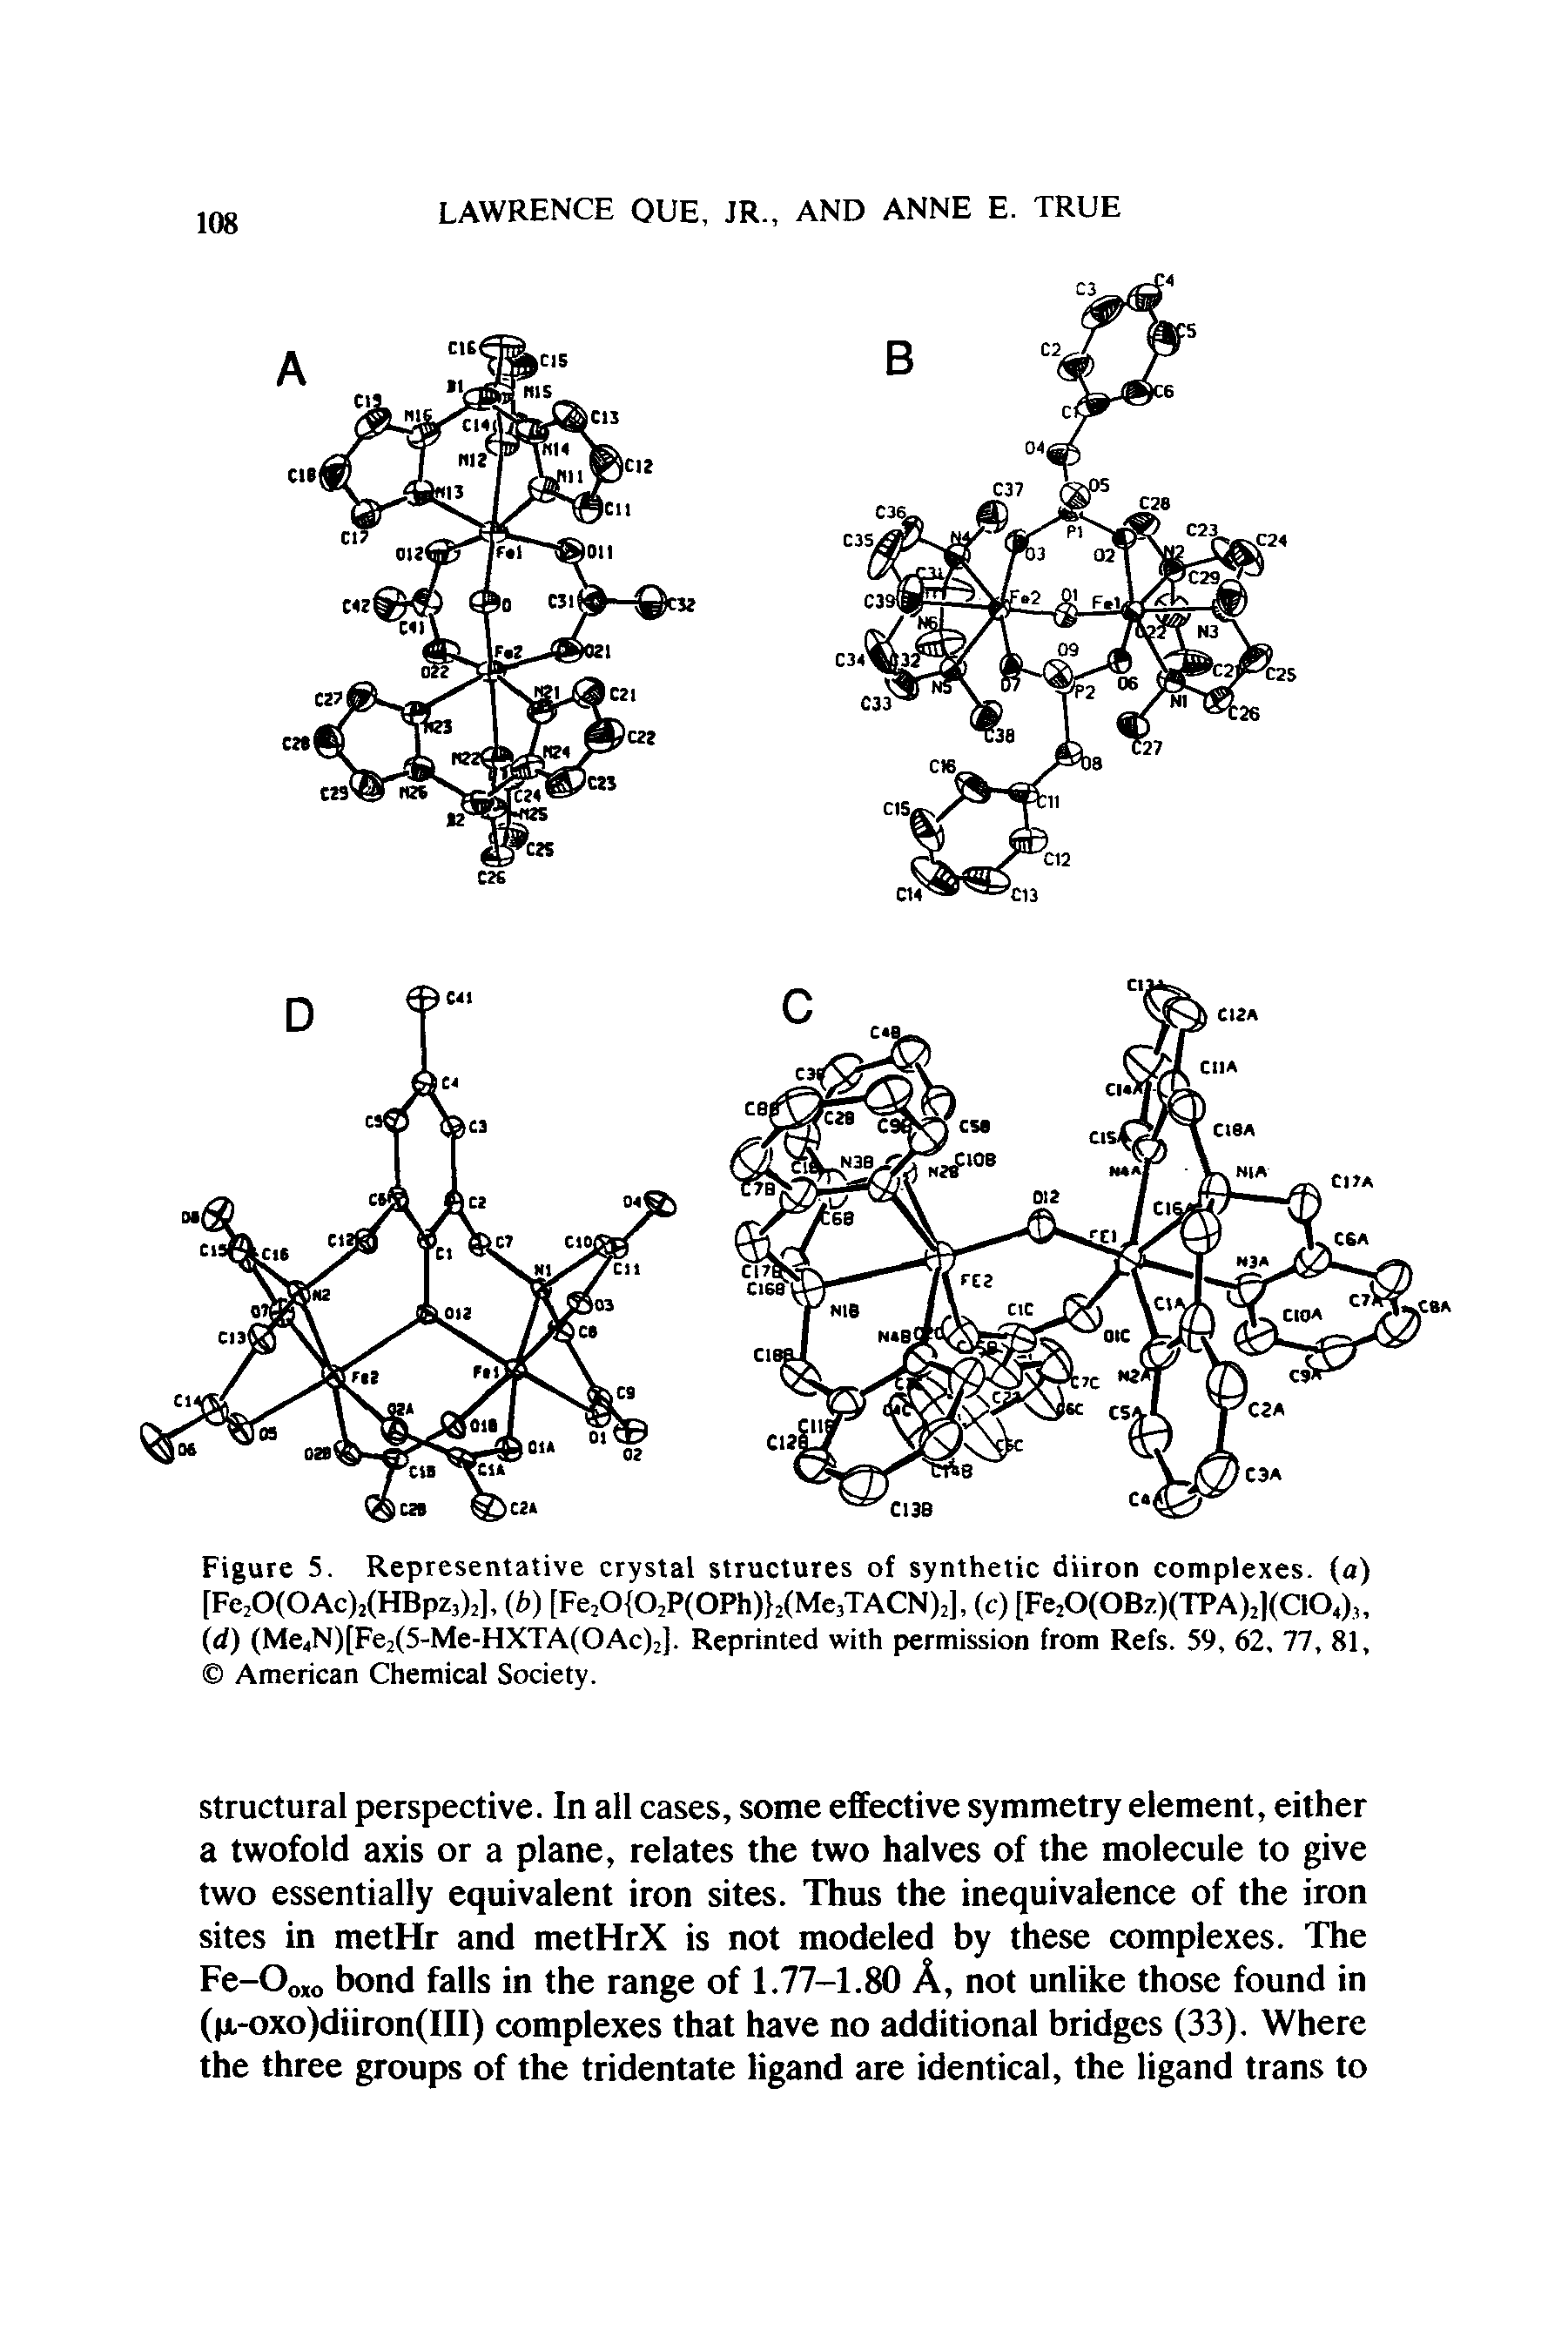 Figure 5. Representative crystal structures of synthetic diiron complexes, (a) [Fe20(0Ac)2(HBpz3)2], (f.) [Fe30 02P(0Ph) 2(Me3TACN)3], (c) [Fe20(0Bz)(TPA)2l(C104) (d) (Me4N)[Fe2(5-Me-HXTA(OAc)2]. Reprinted with permission from Refs. 59, 62, 77, 81, American Chemical Society.